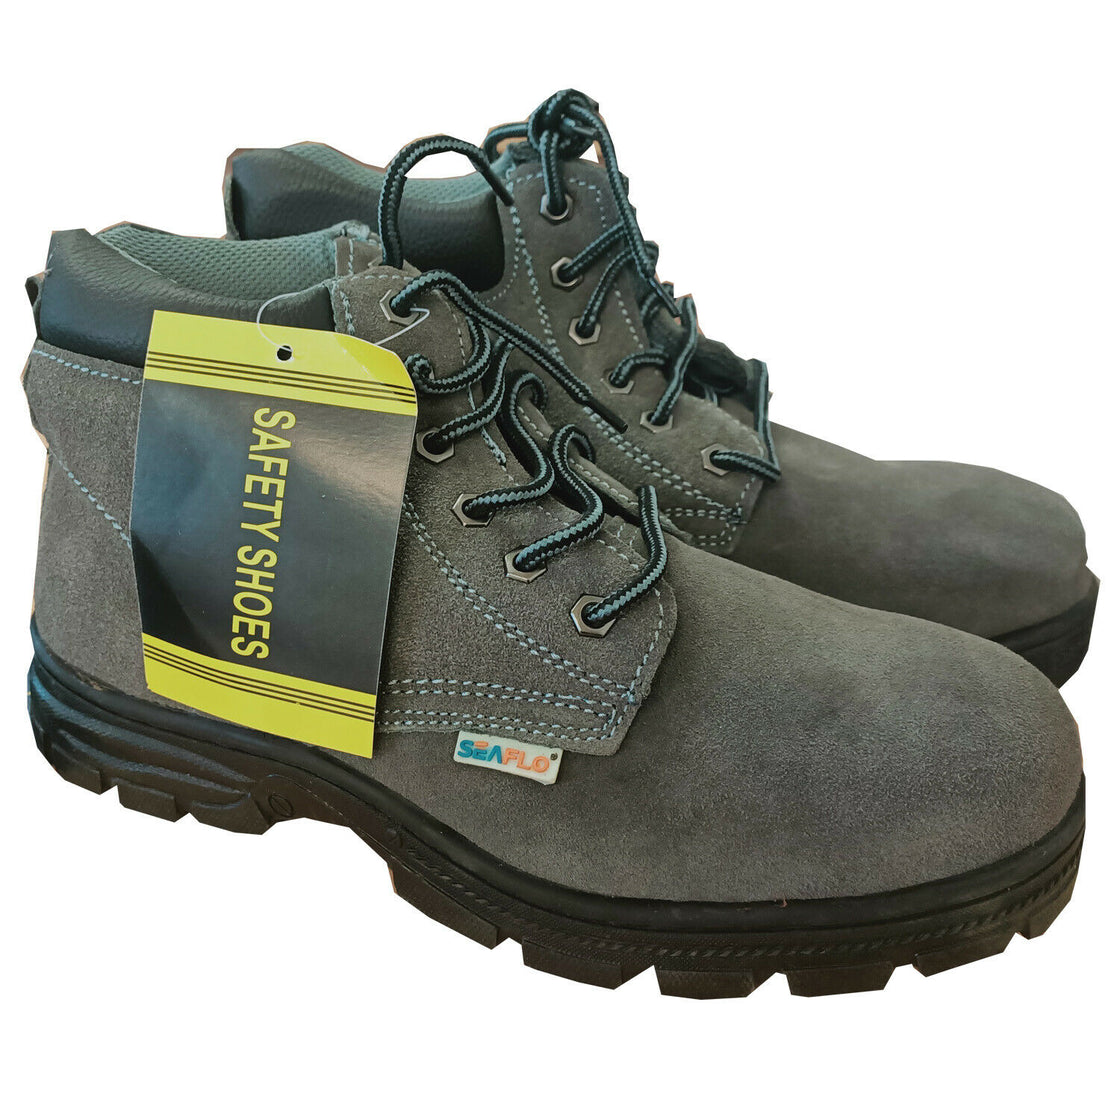 GREY SUEDE LEATHER WORKER SAFETY BOOTS - STEEL TOE CAP - PGS Supplies 21 Ltd